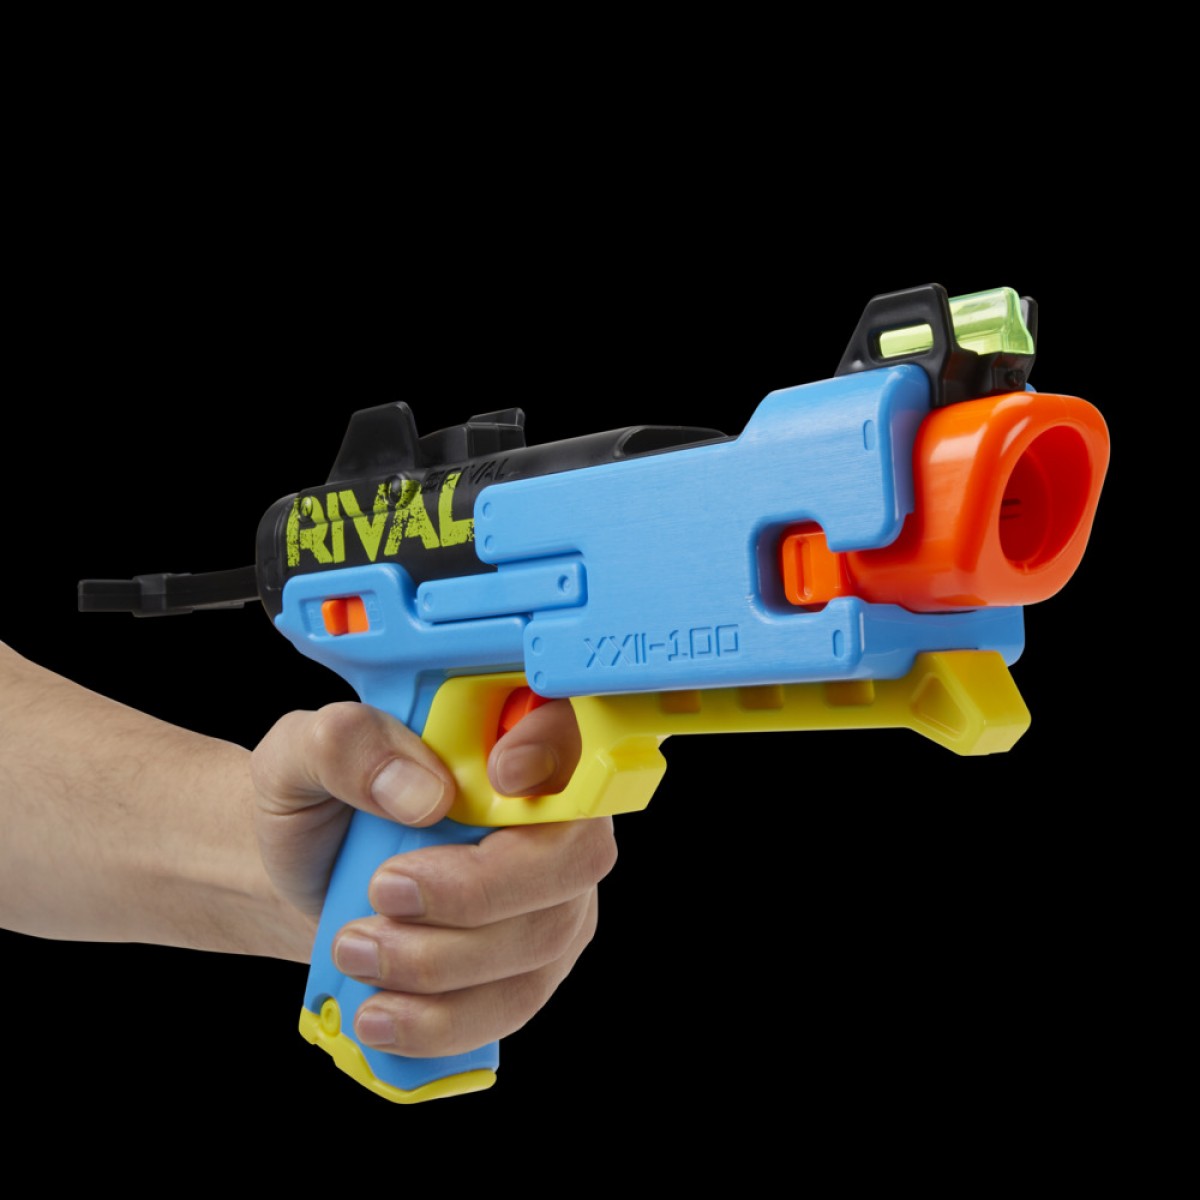 Nerf Rival Fate Xxii 100, Multicolor, 14Y+